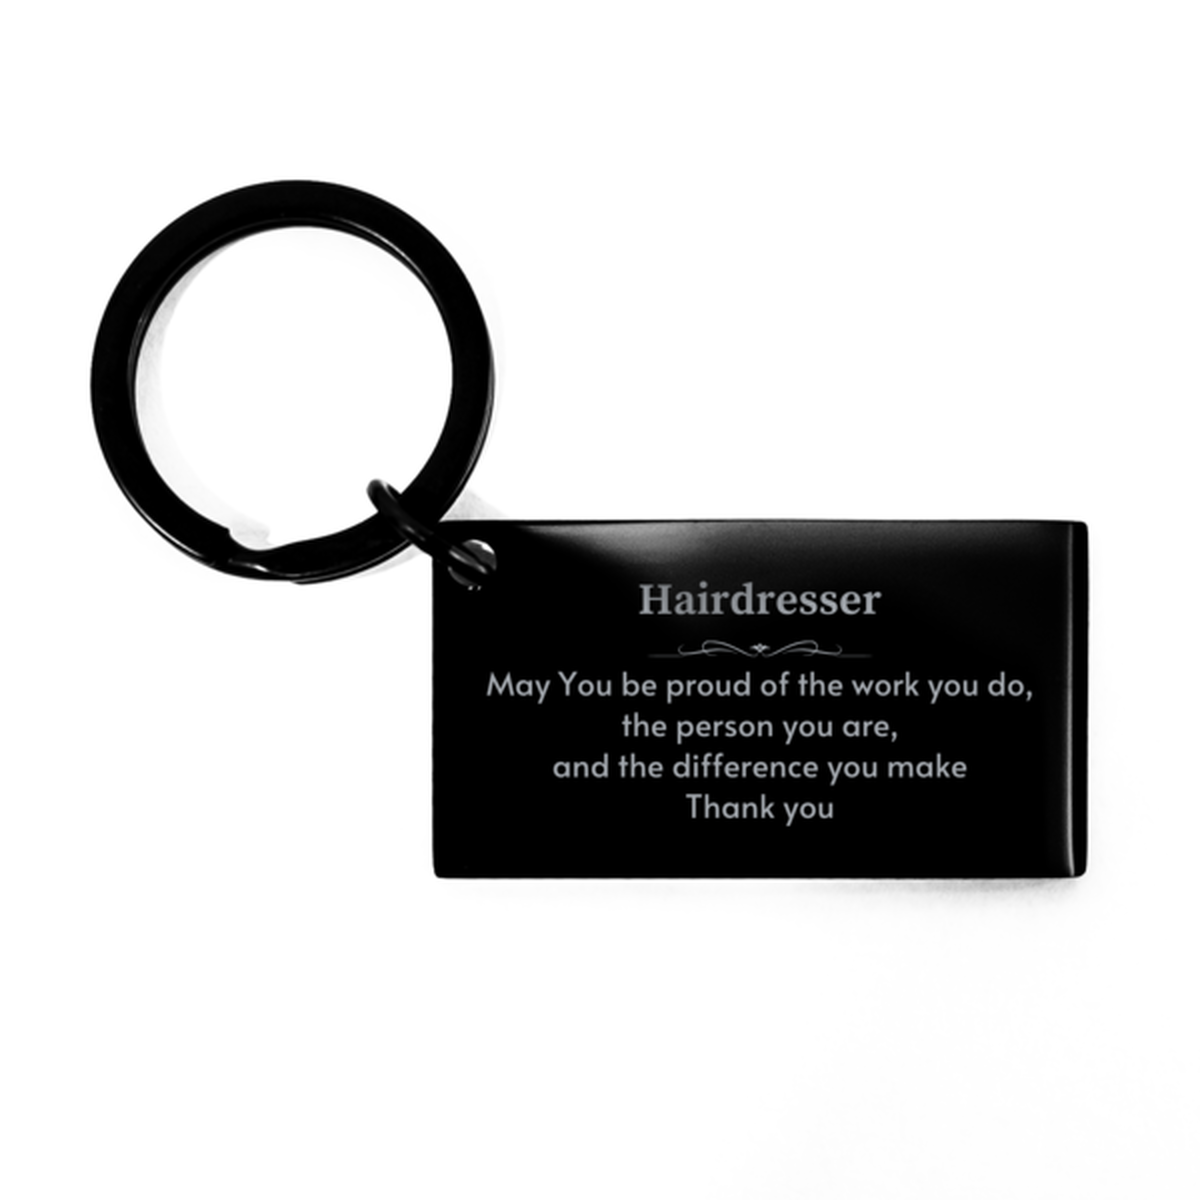 Heartwarming Keychain Retirement Coworkers Gifts for Hairdresser, Mechanic May You be proud of the work you do, the person you are Gifts for Boss Men Women Friends